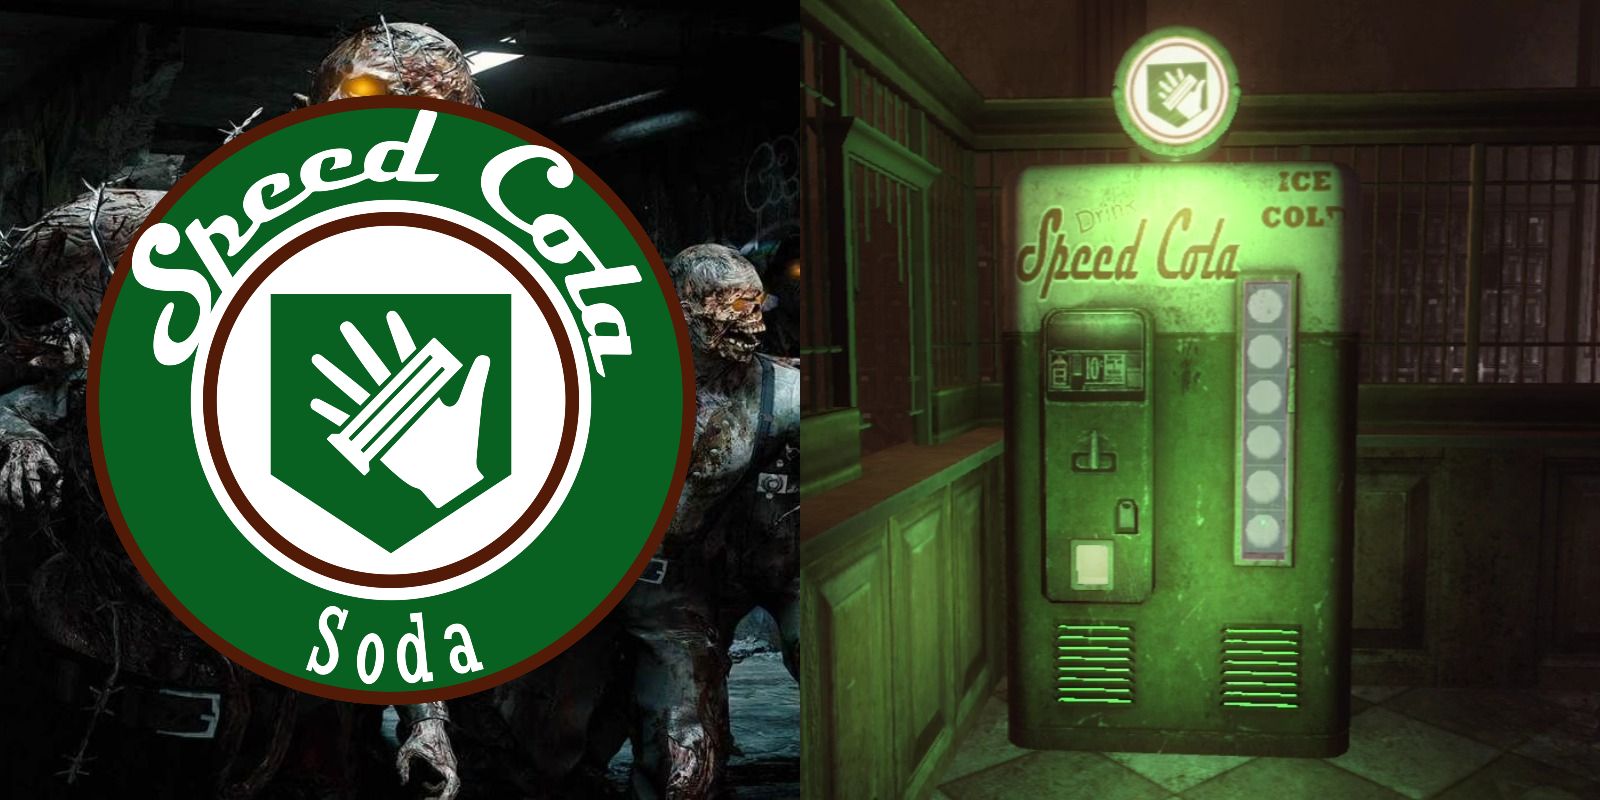 Speed Cola soda machine and logo in Call Of Duty Black Ops series